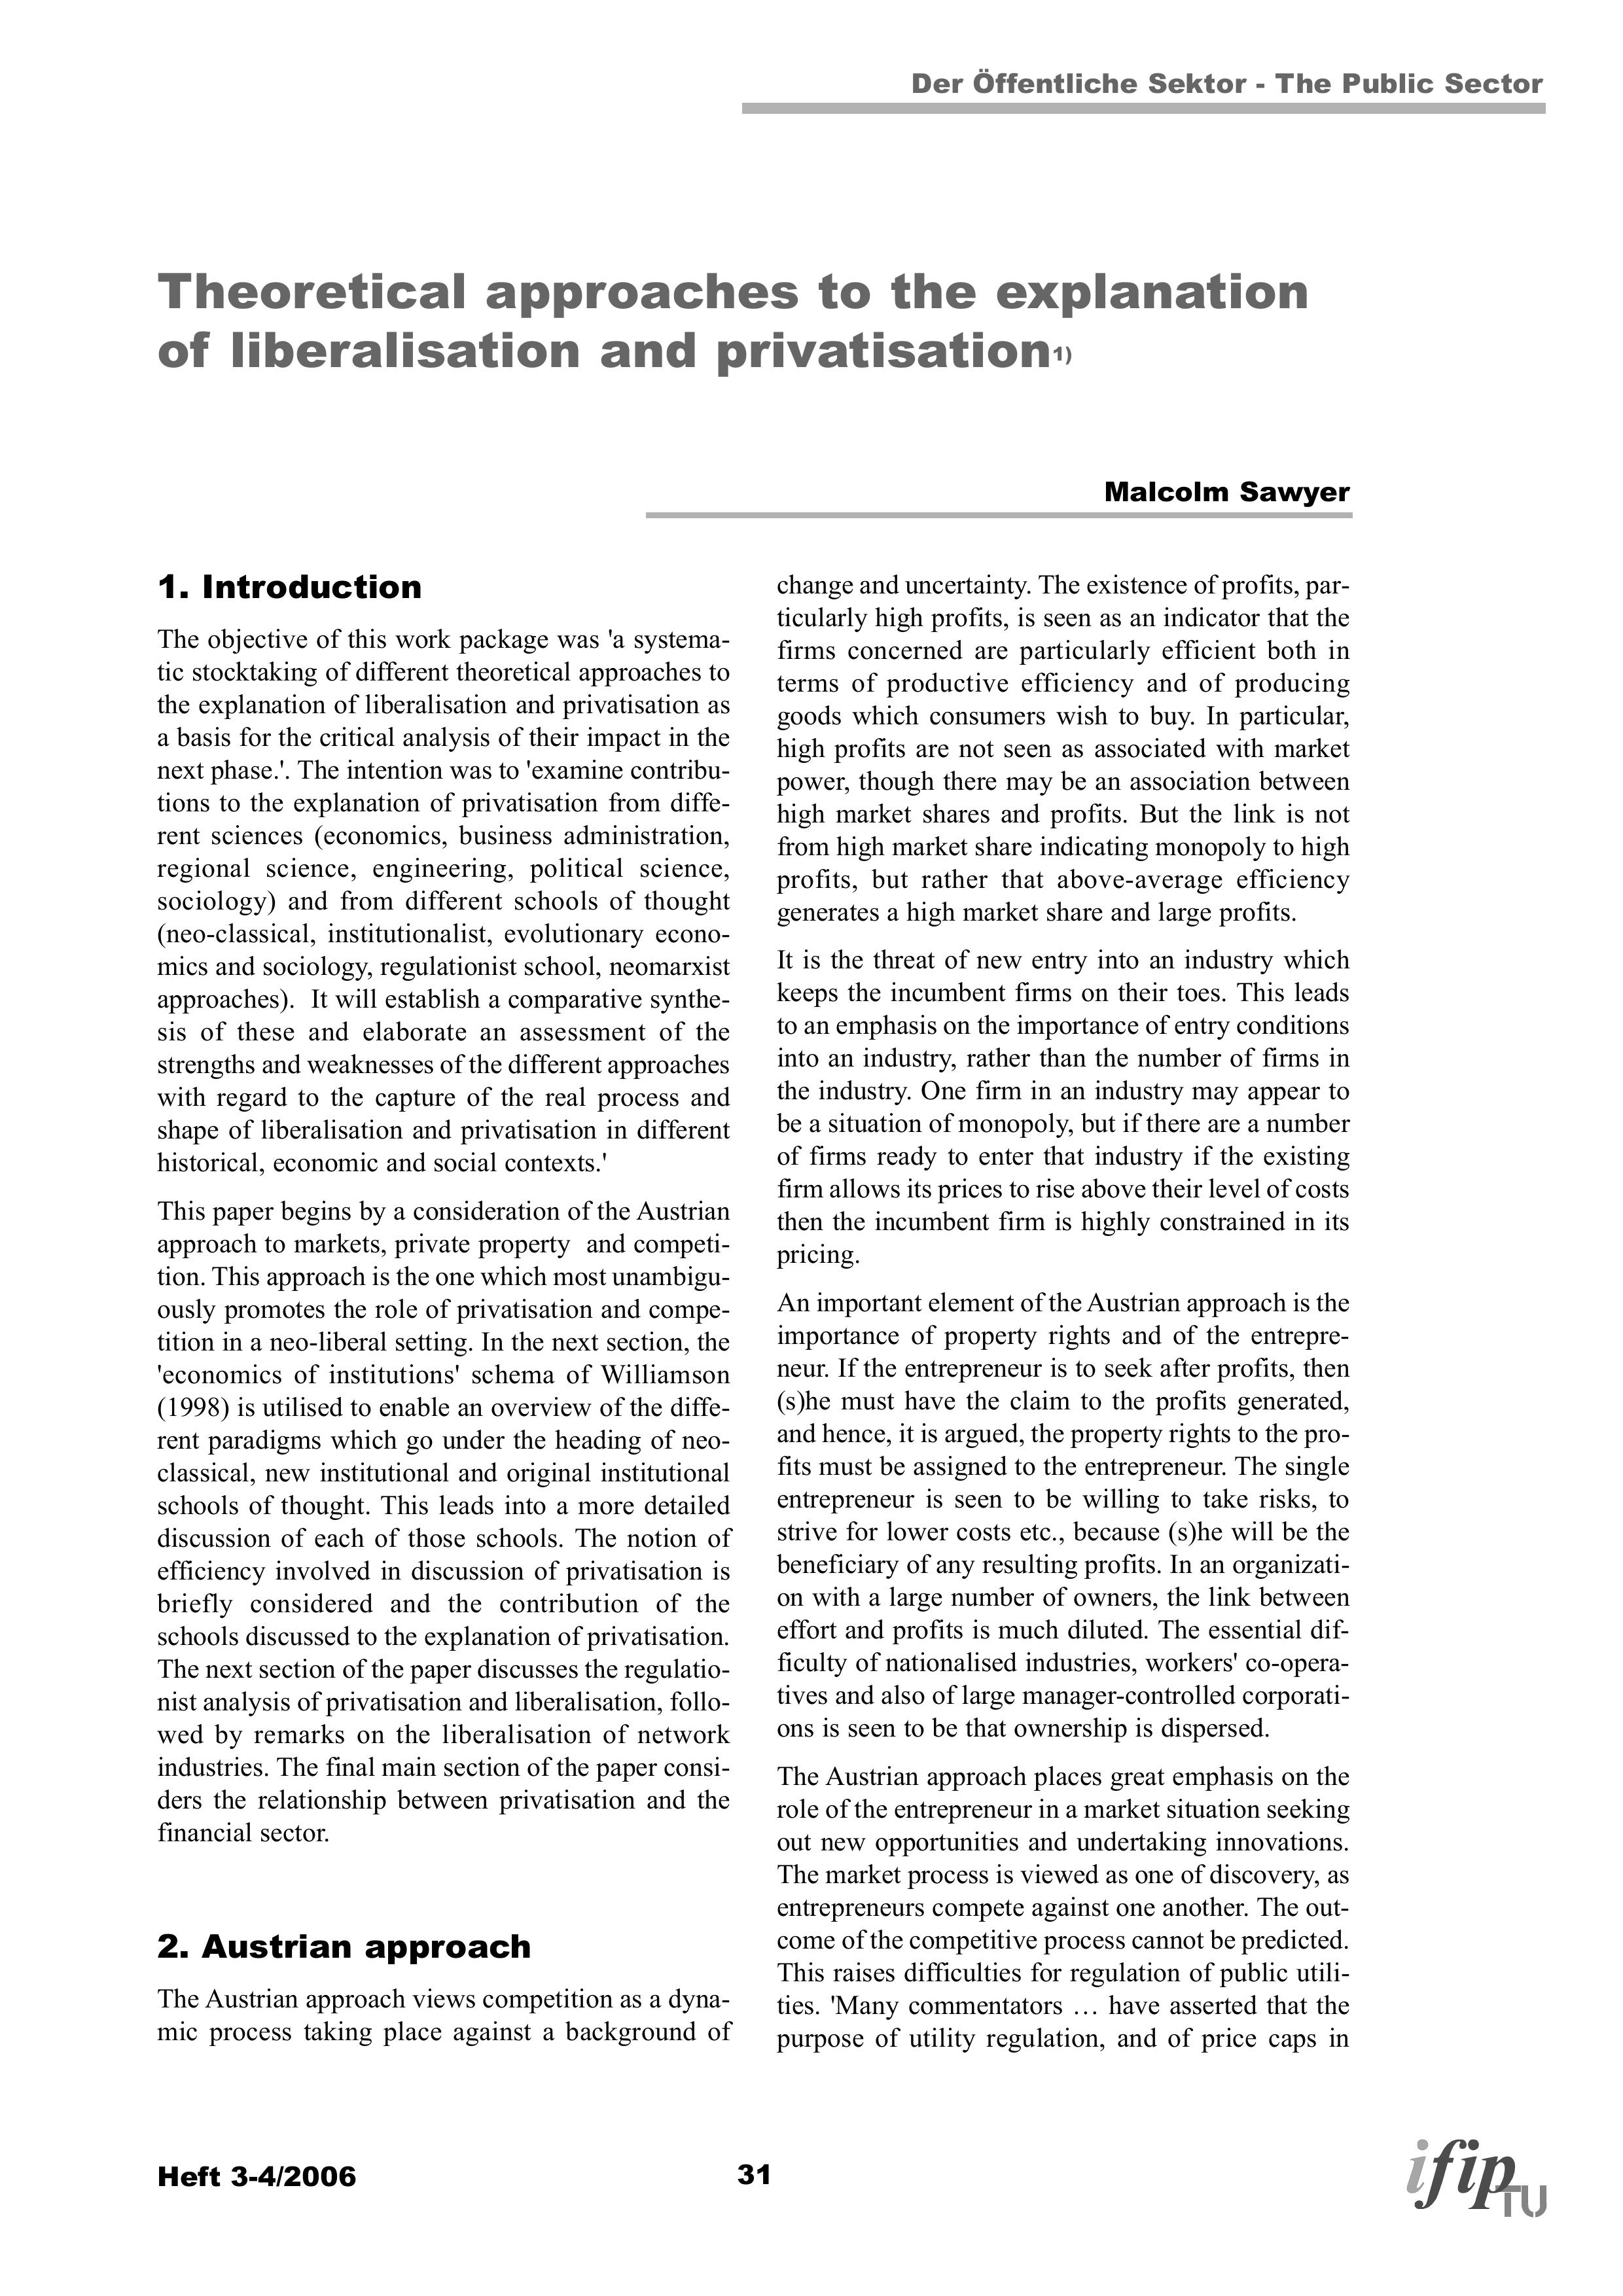 Theoretical approaches to the explanation of liberalisation and privatisation